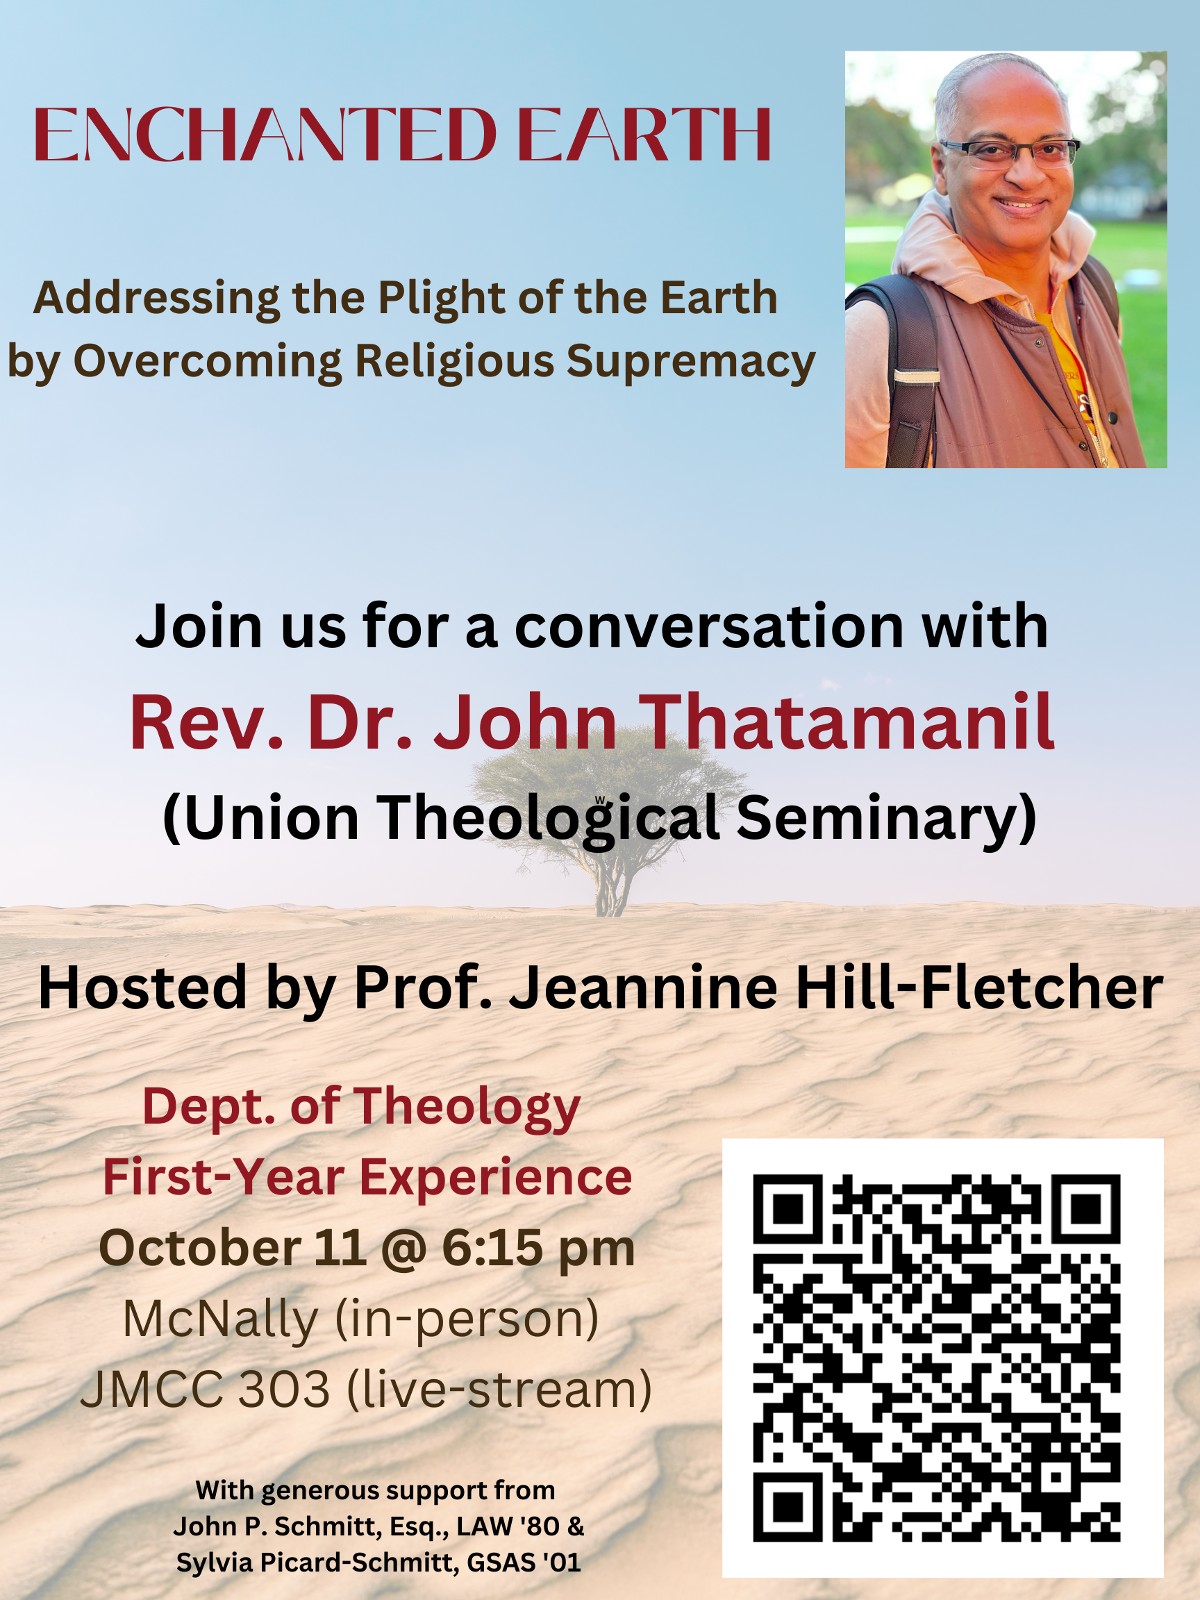 Enchanted Earth: Addressing the Plight of the Earth by Overcoming Religious Supremacy: A conversation with Rev. Dr. John Thatamanil